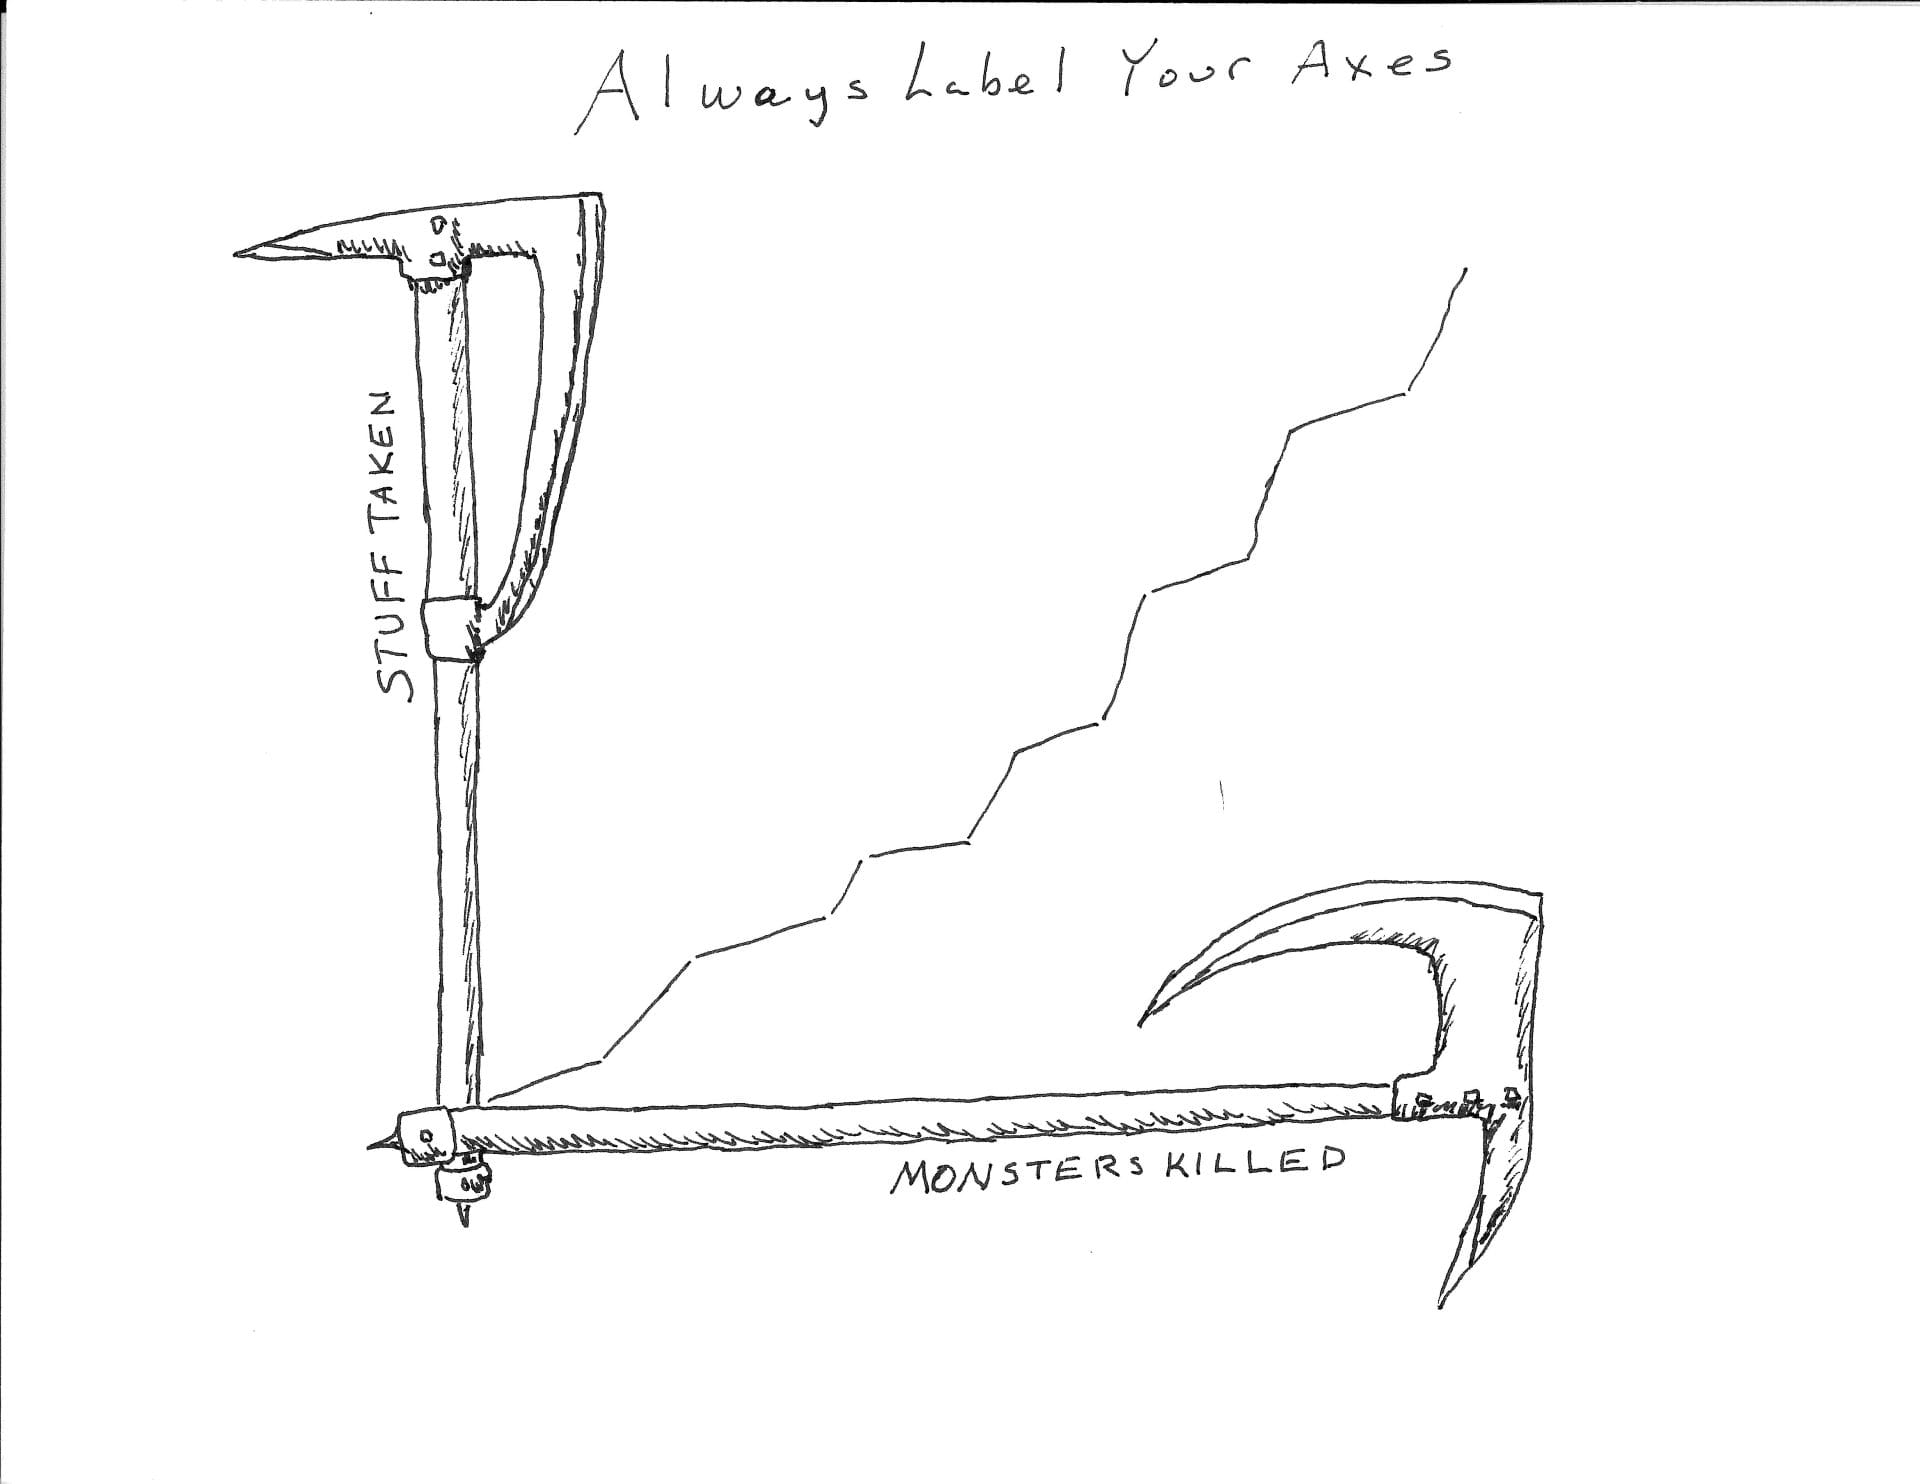 Label your axes